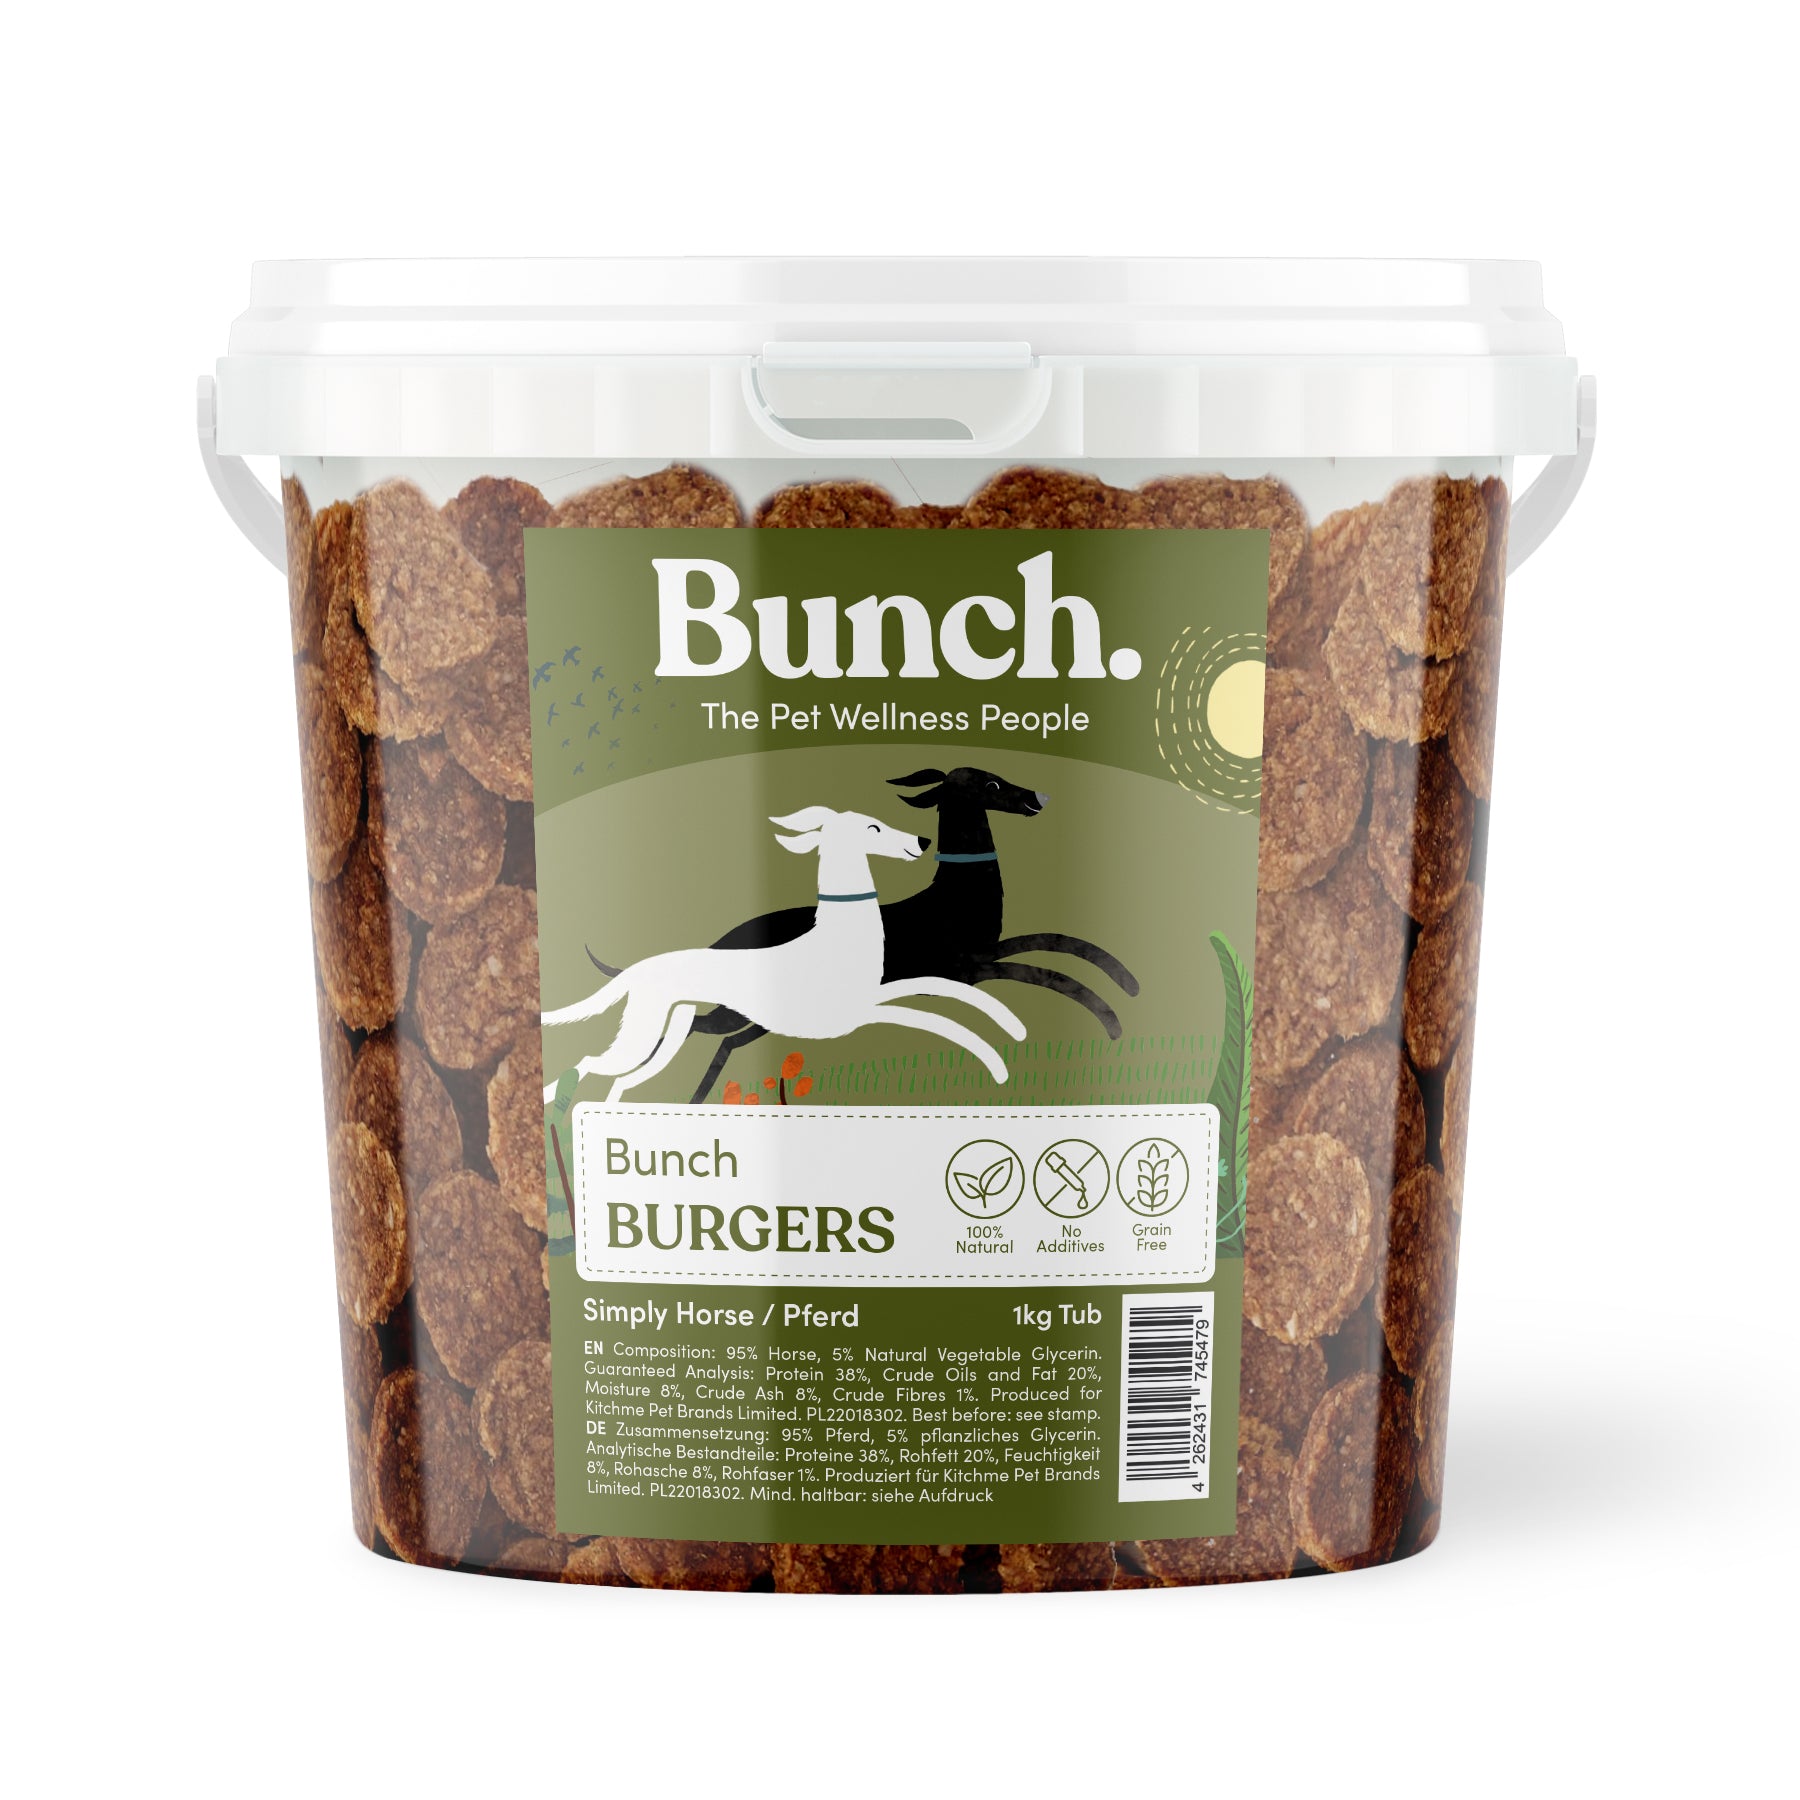 Horse Burgers by Bunch (1kg-Bucket)